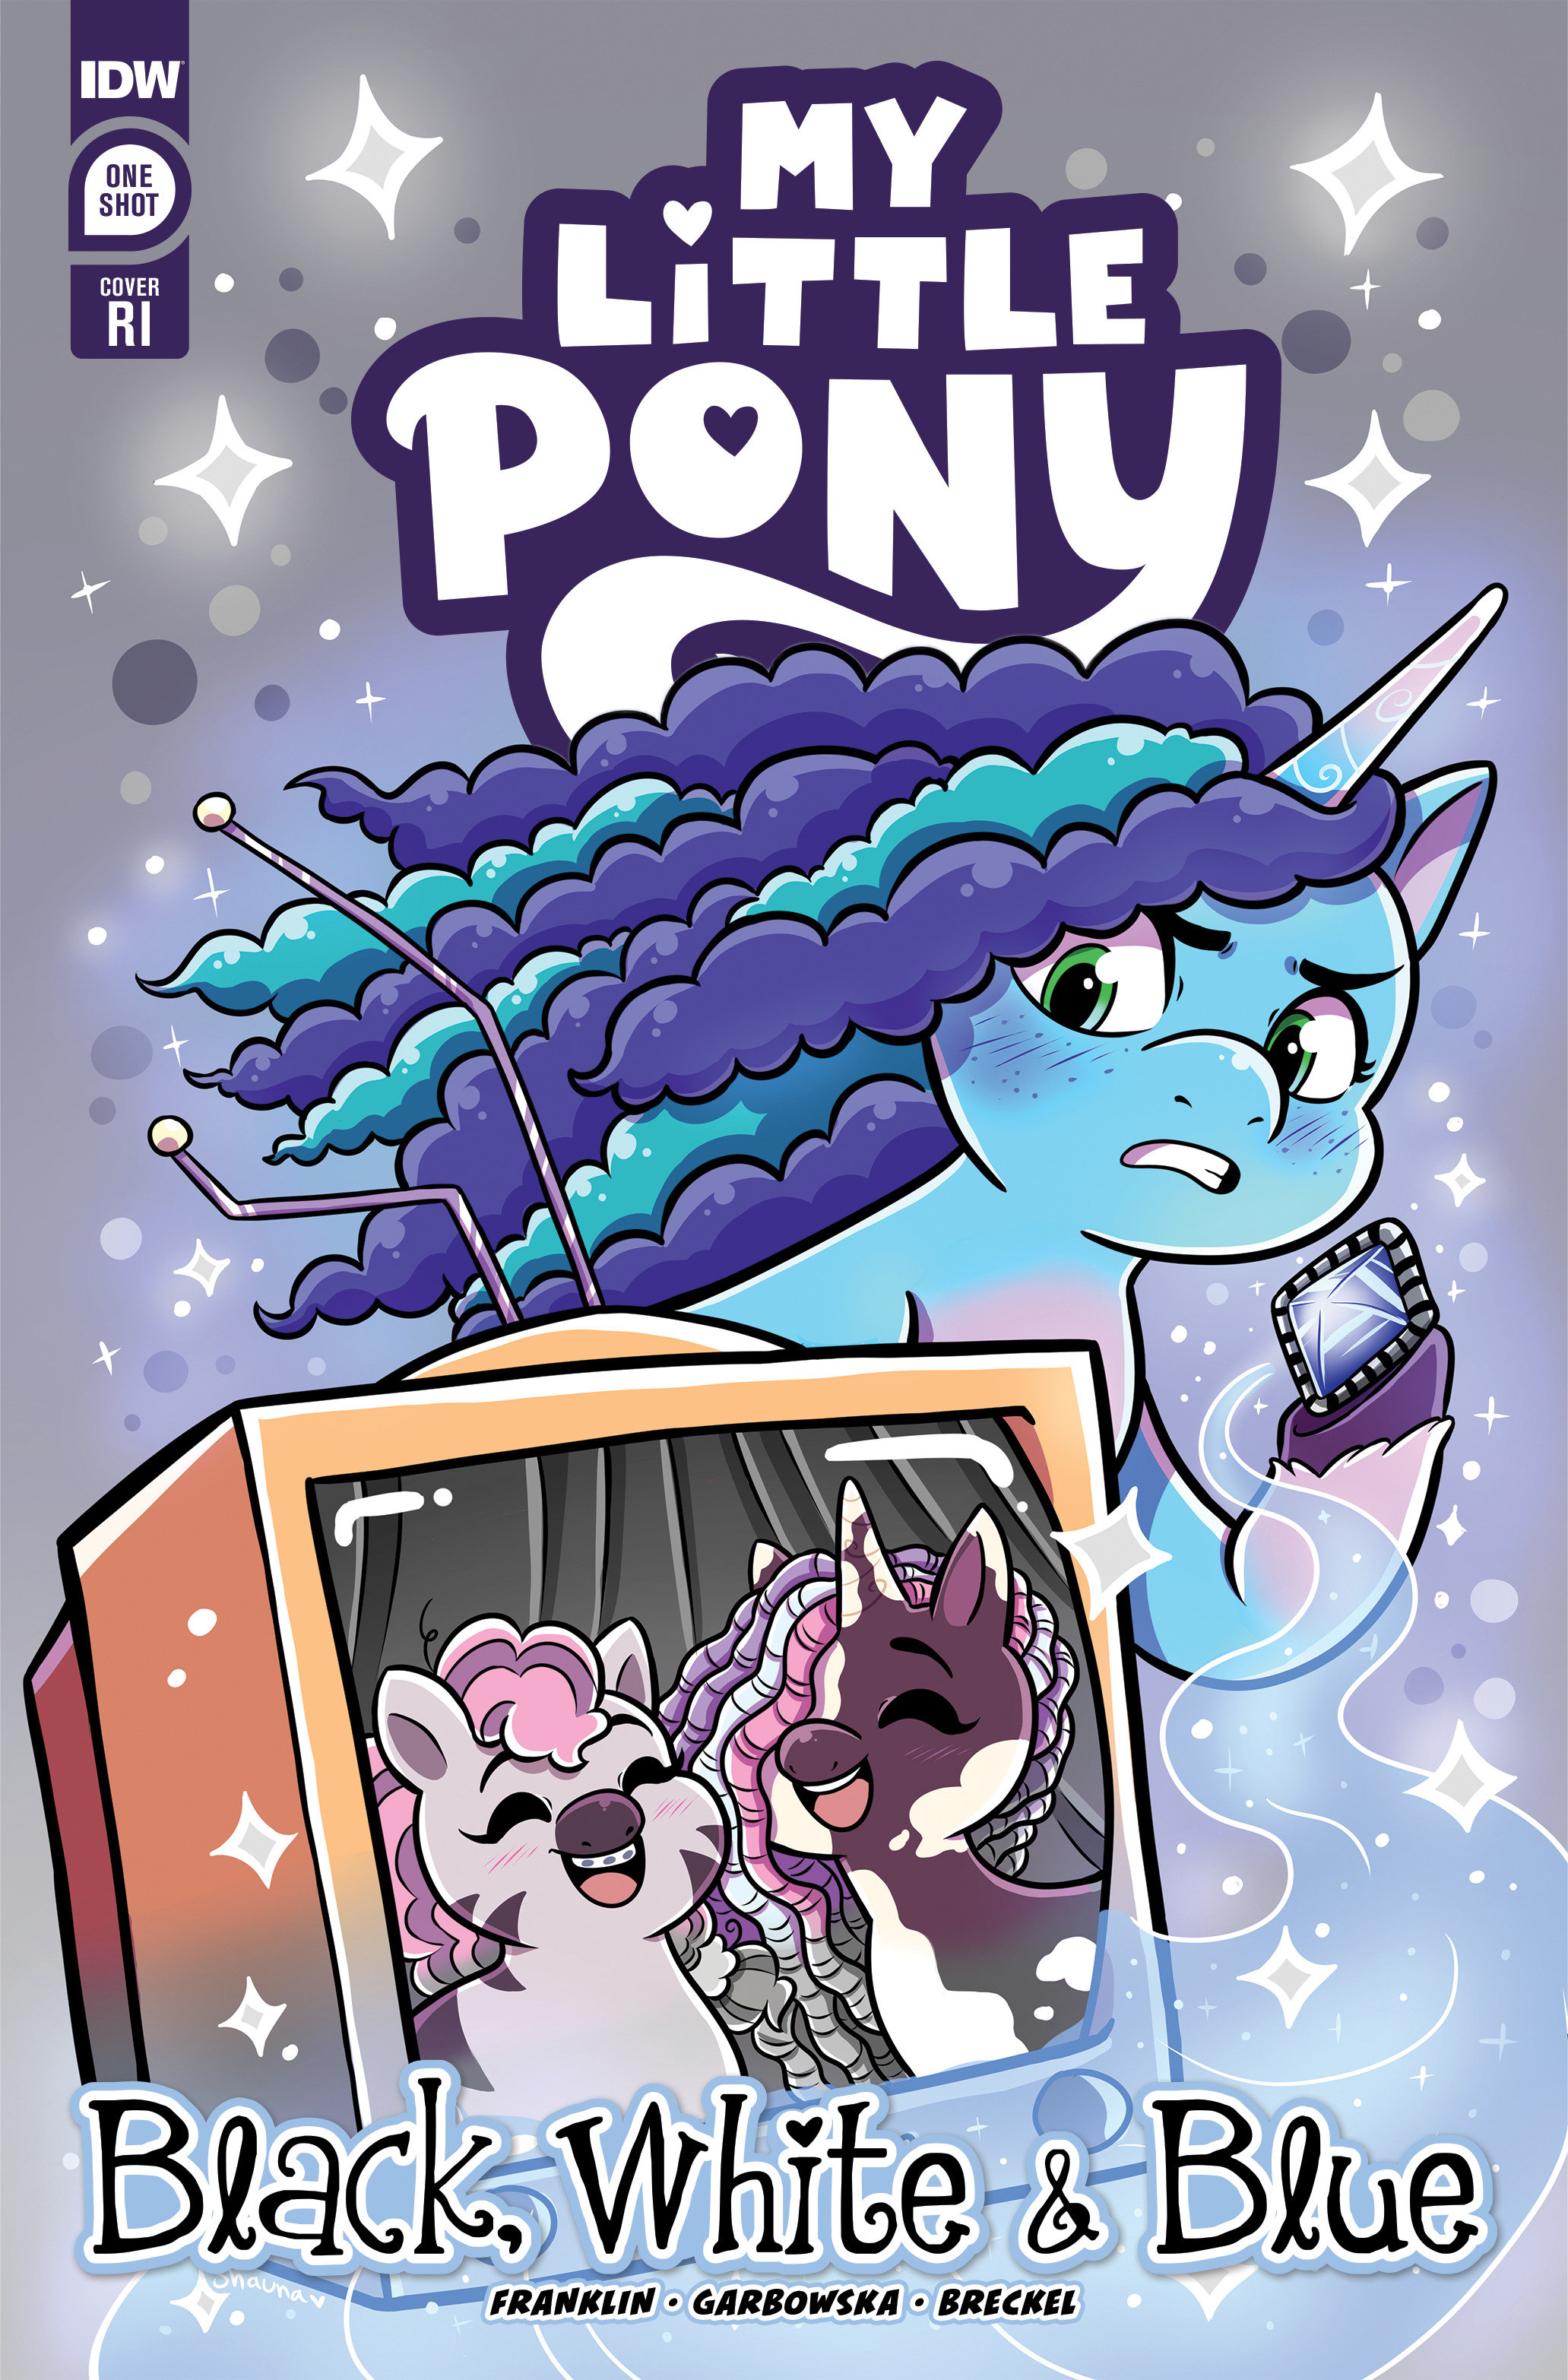 My Little Pony: Black, White & Blue Cover Grant Retailer Incentive 1 for 10 Incentive